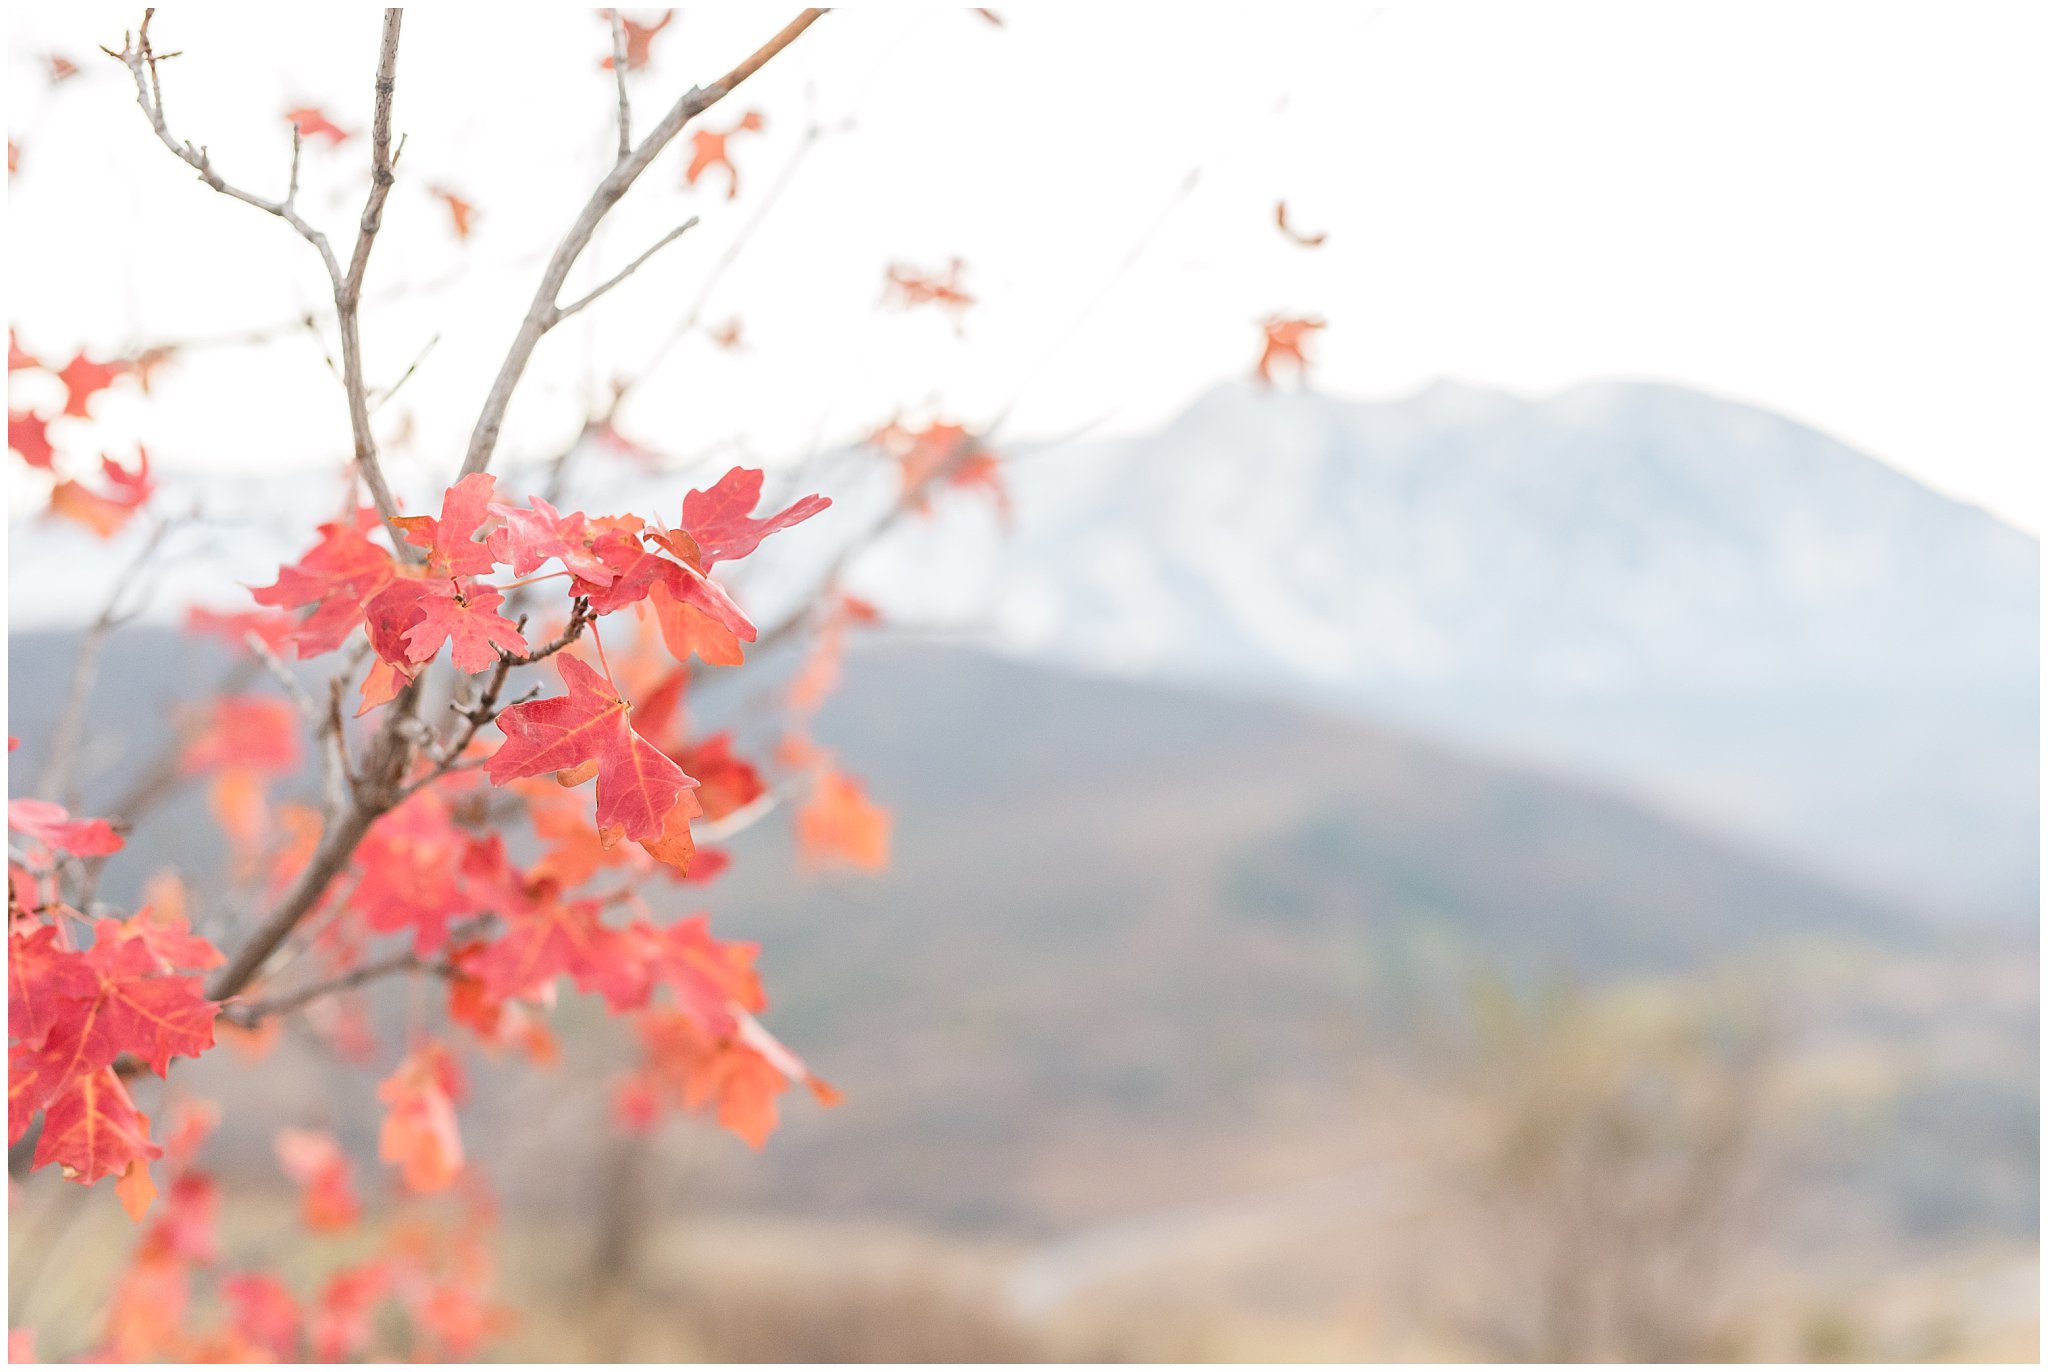 The last remaining red fall leaves | Fall Family Pictures in the Mountains | Snowbasin, Utah | Jessie and Dallin Photography